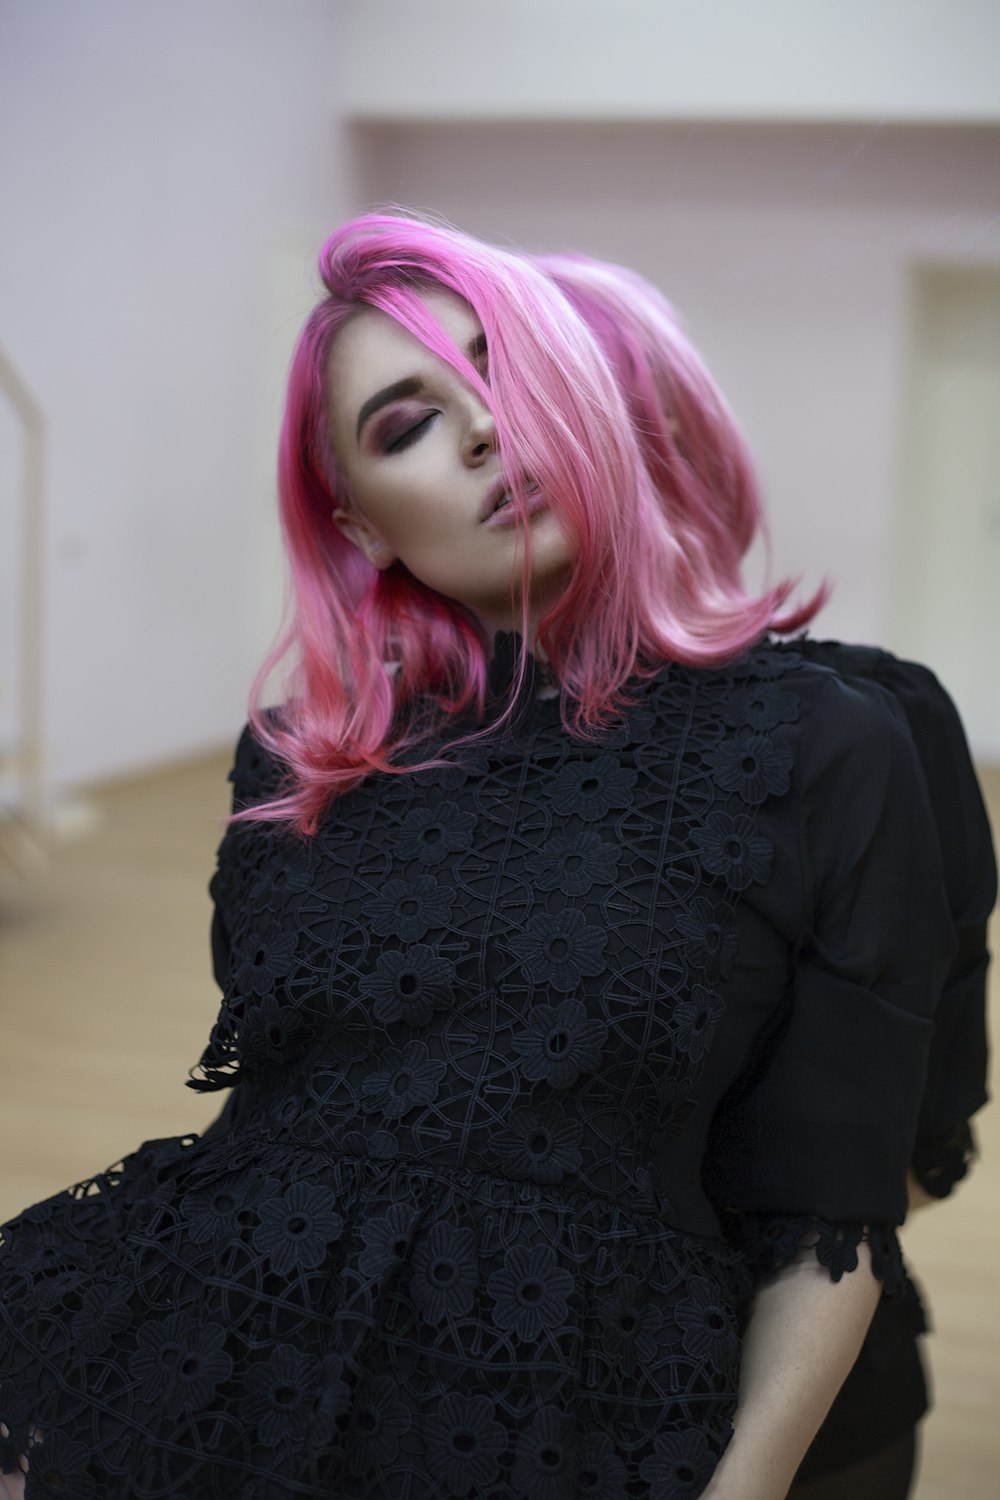 pink haired woman in black dress with eye closed